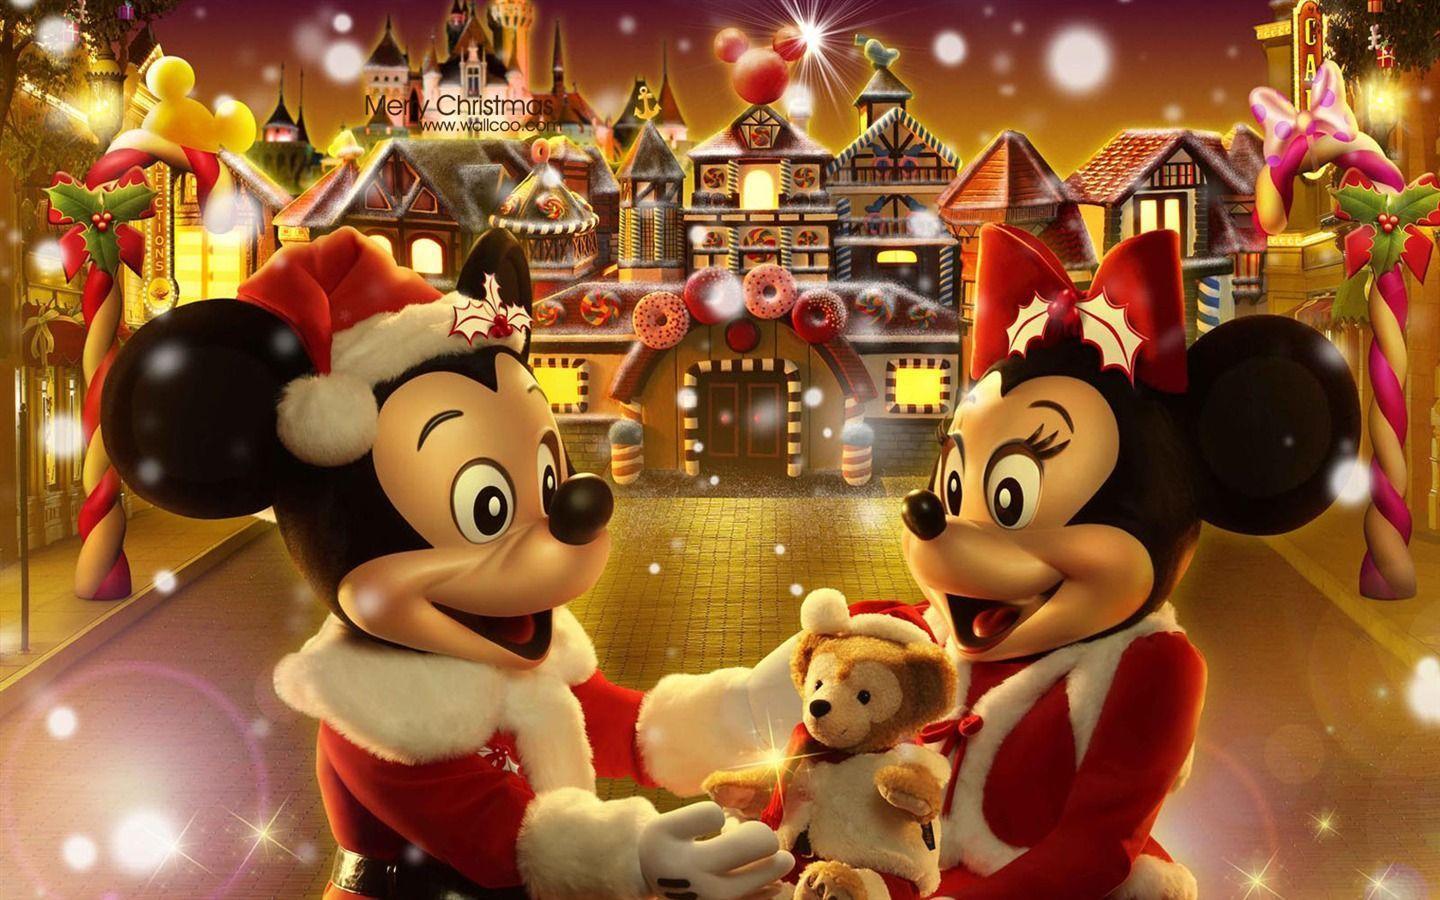 Mickey and Minnie The Gingerbread Man Christmas wallpaper fairy